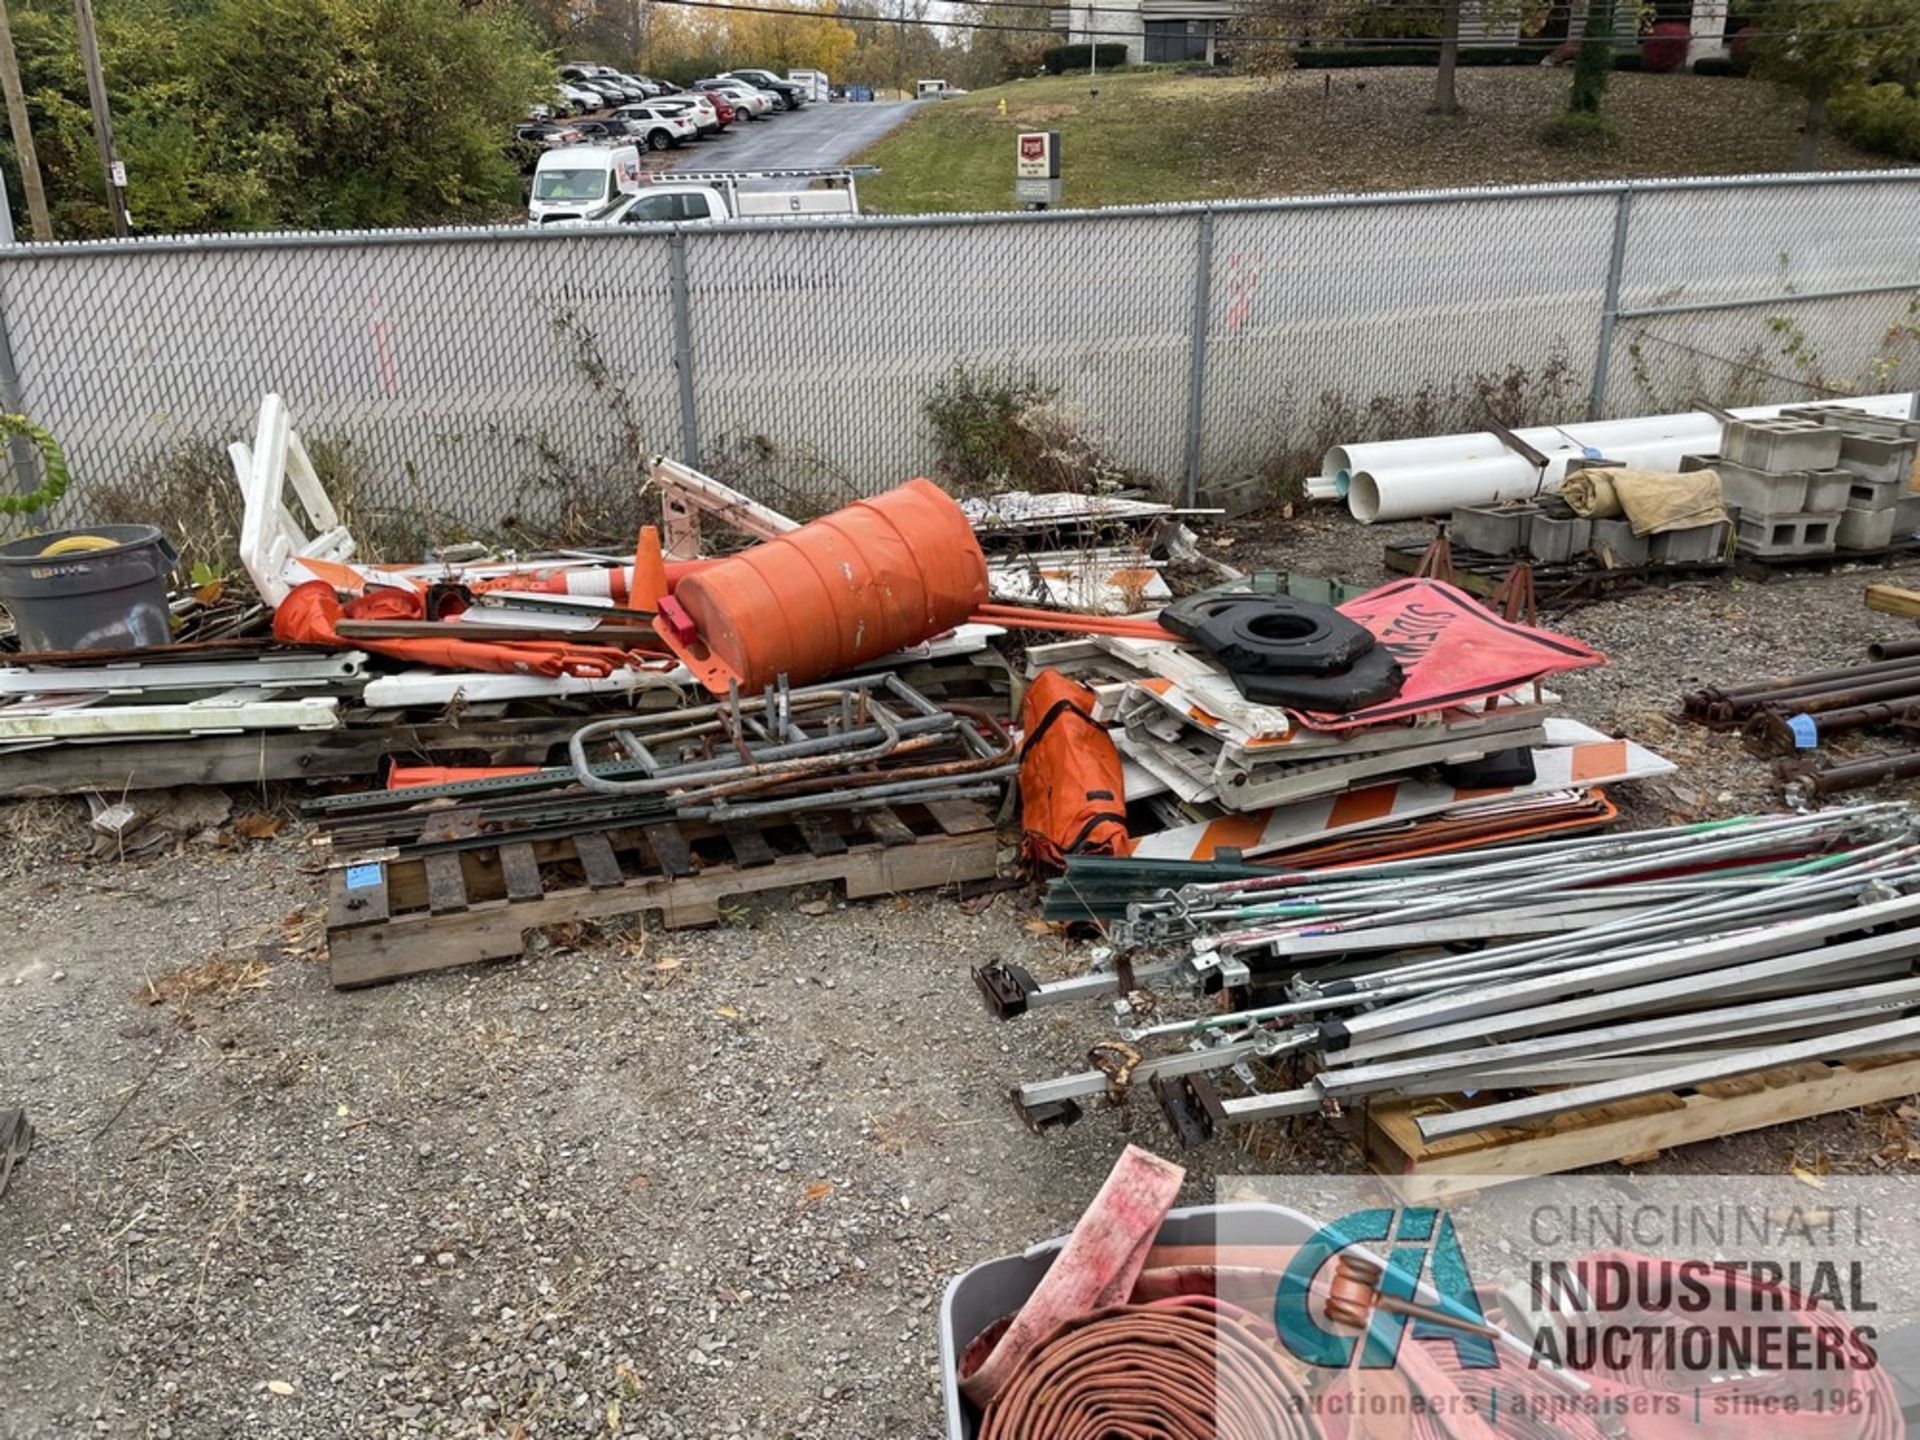 (LOT) MISCELLANEOUS JOB-SITE SIGNS, BARRIERS AND SIGN STANDS